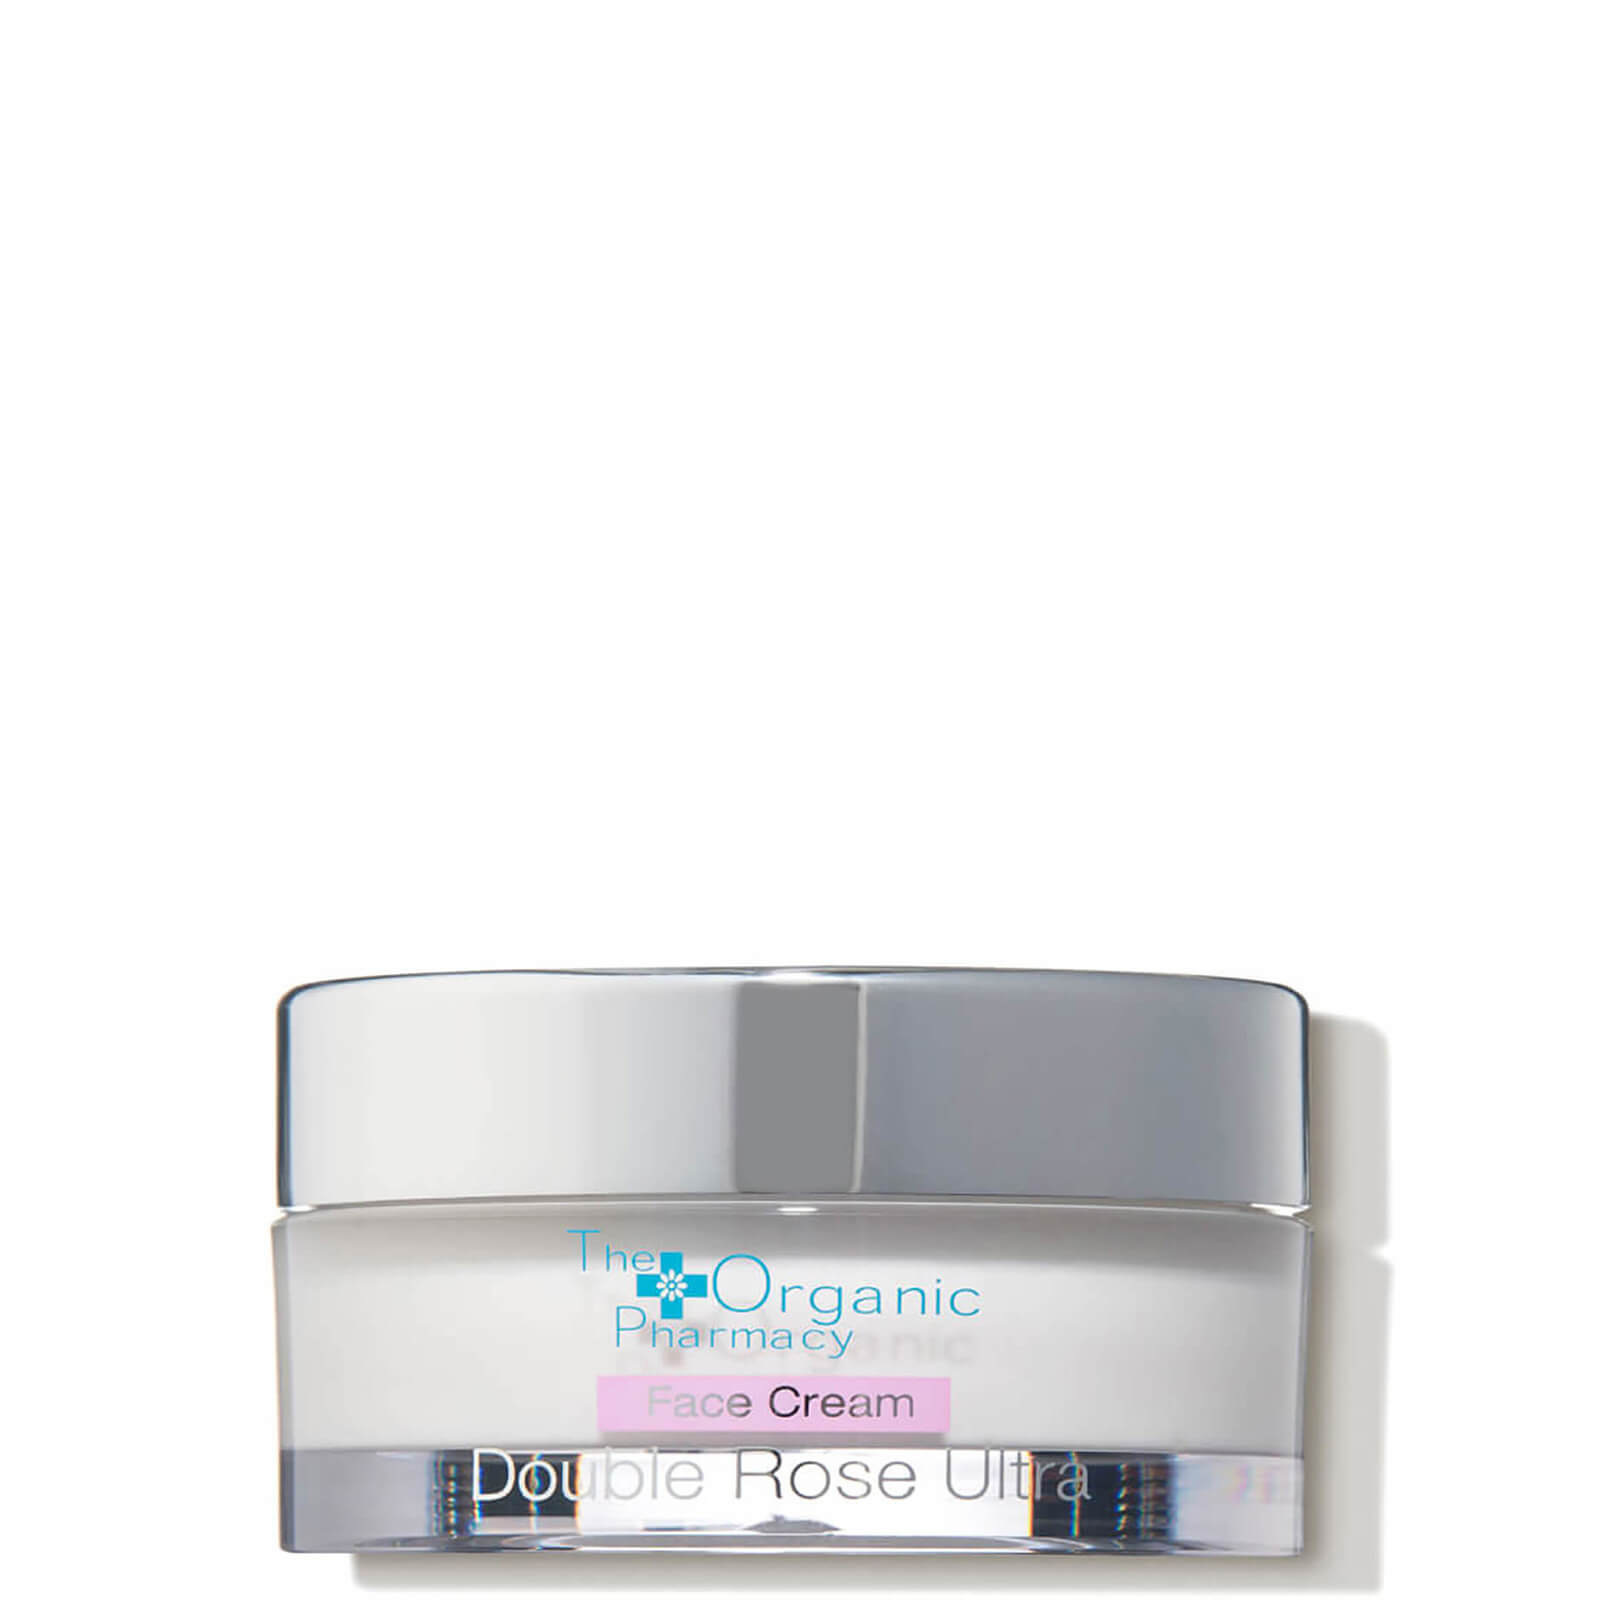 Image of The Organic Pharmacy Double Rose Ultra Face Cream 50ml